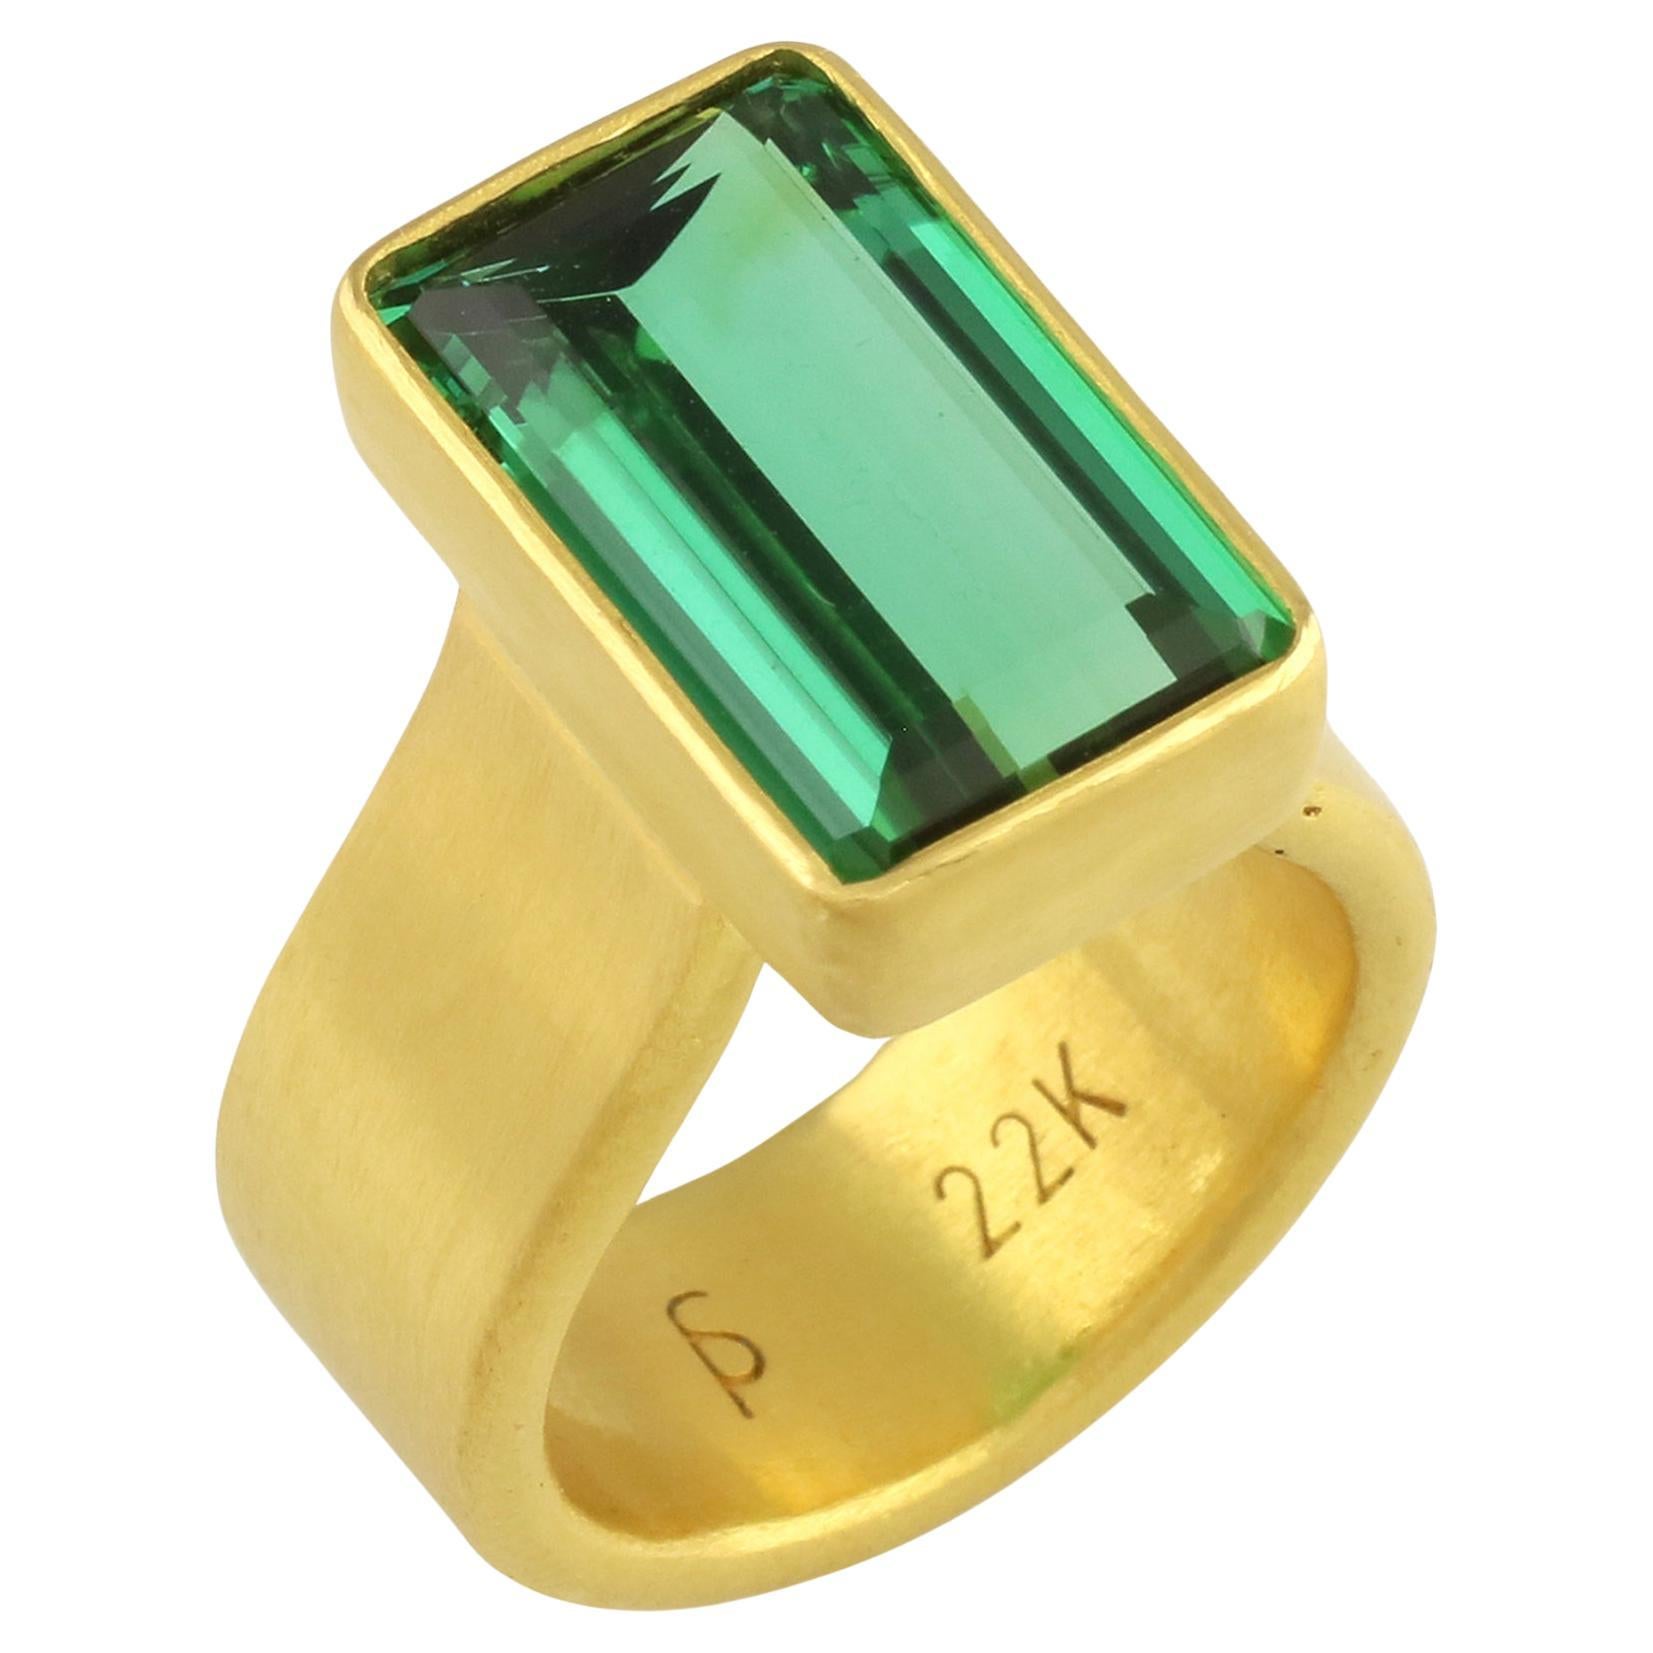 PHILIPPE SPENCER 8.4 Ct. Extra-Fine Tourmaline Statement Ring in 22K Gold